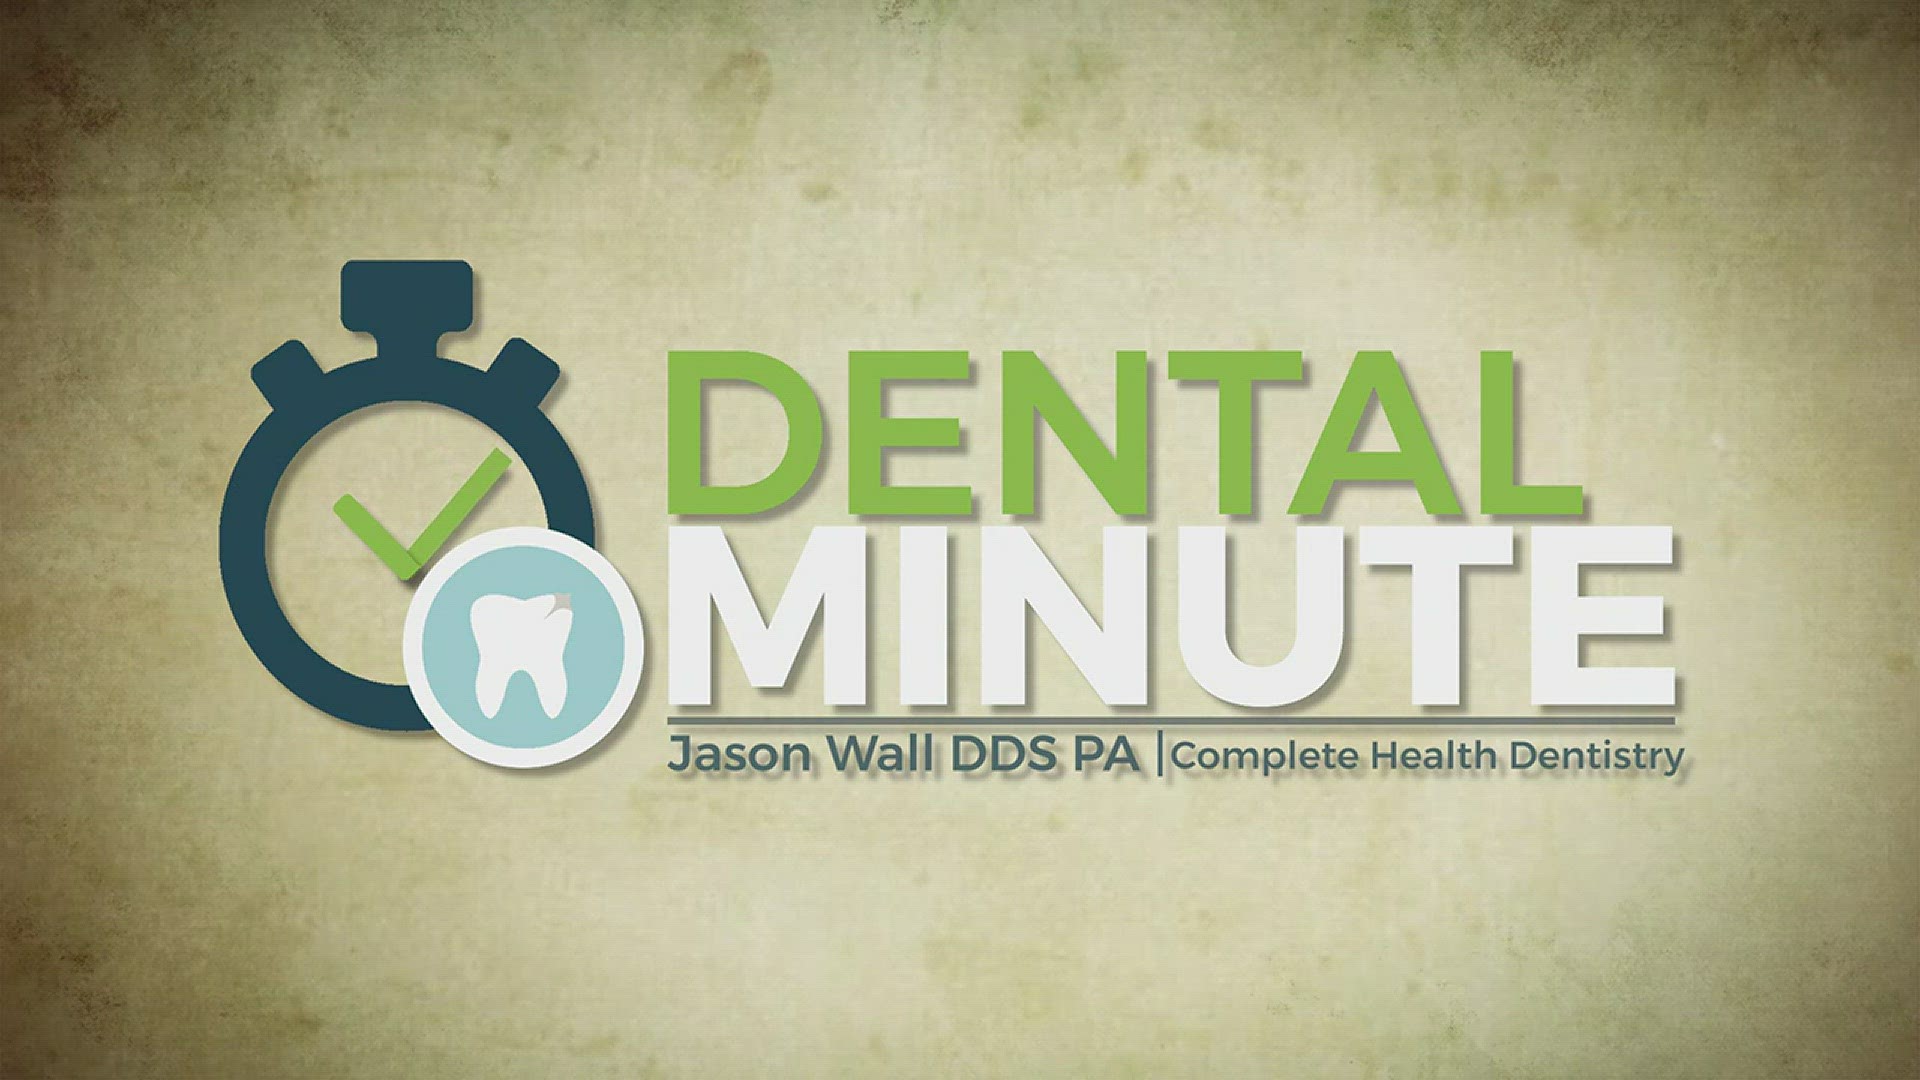 Episode 3 of Dental Minute with Jason Wall